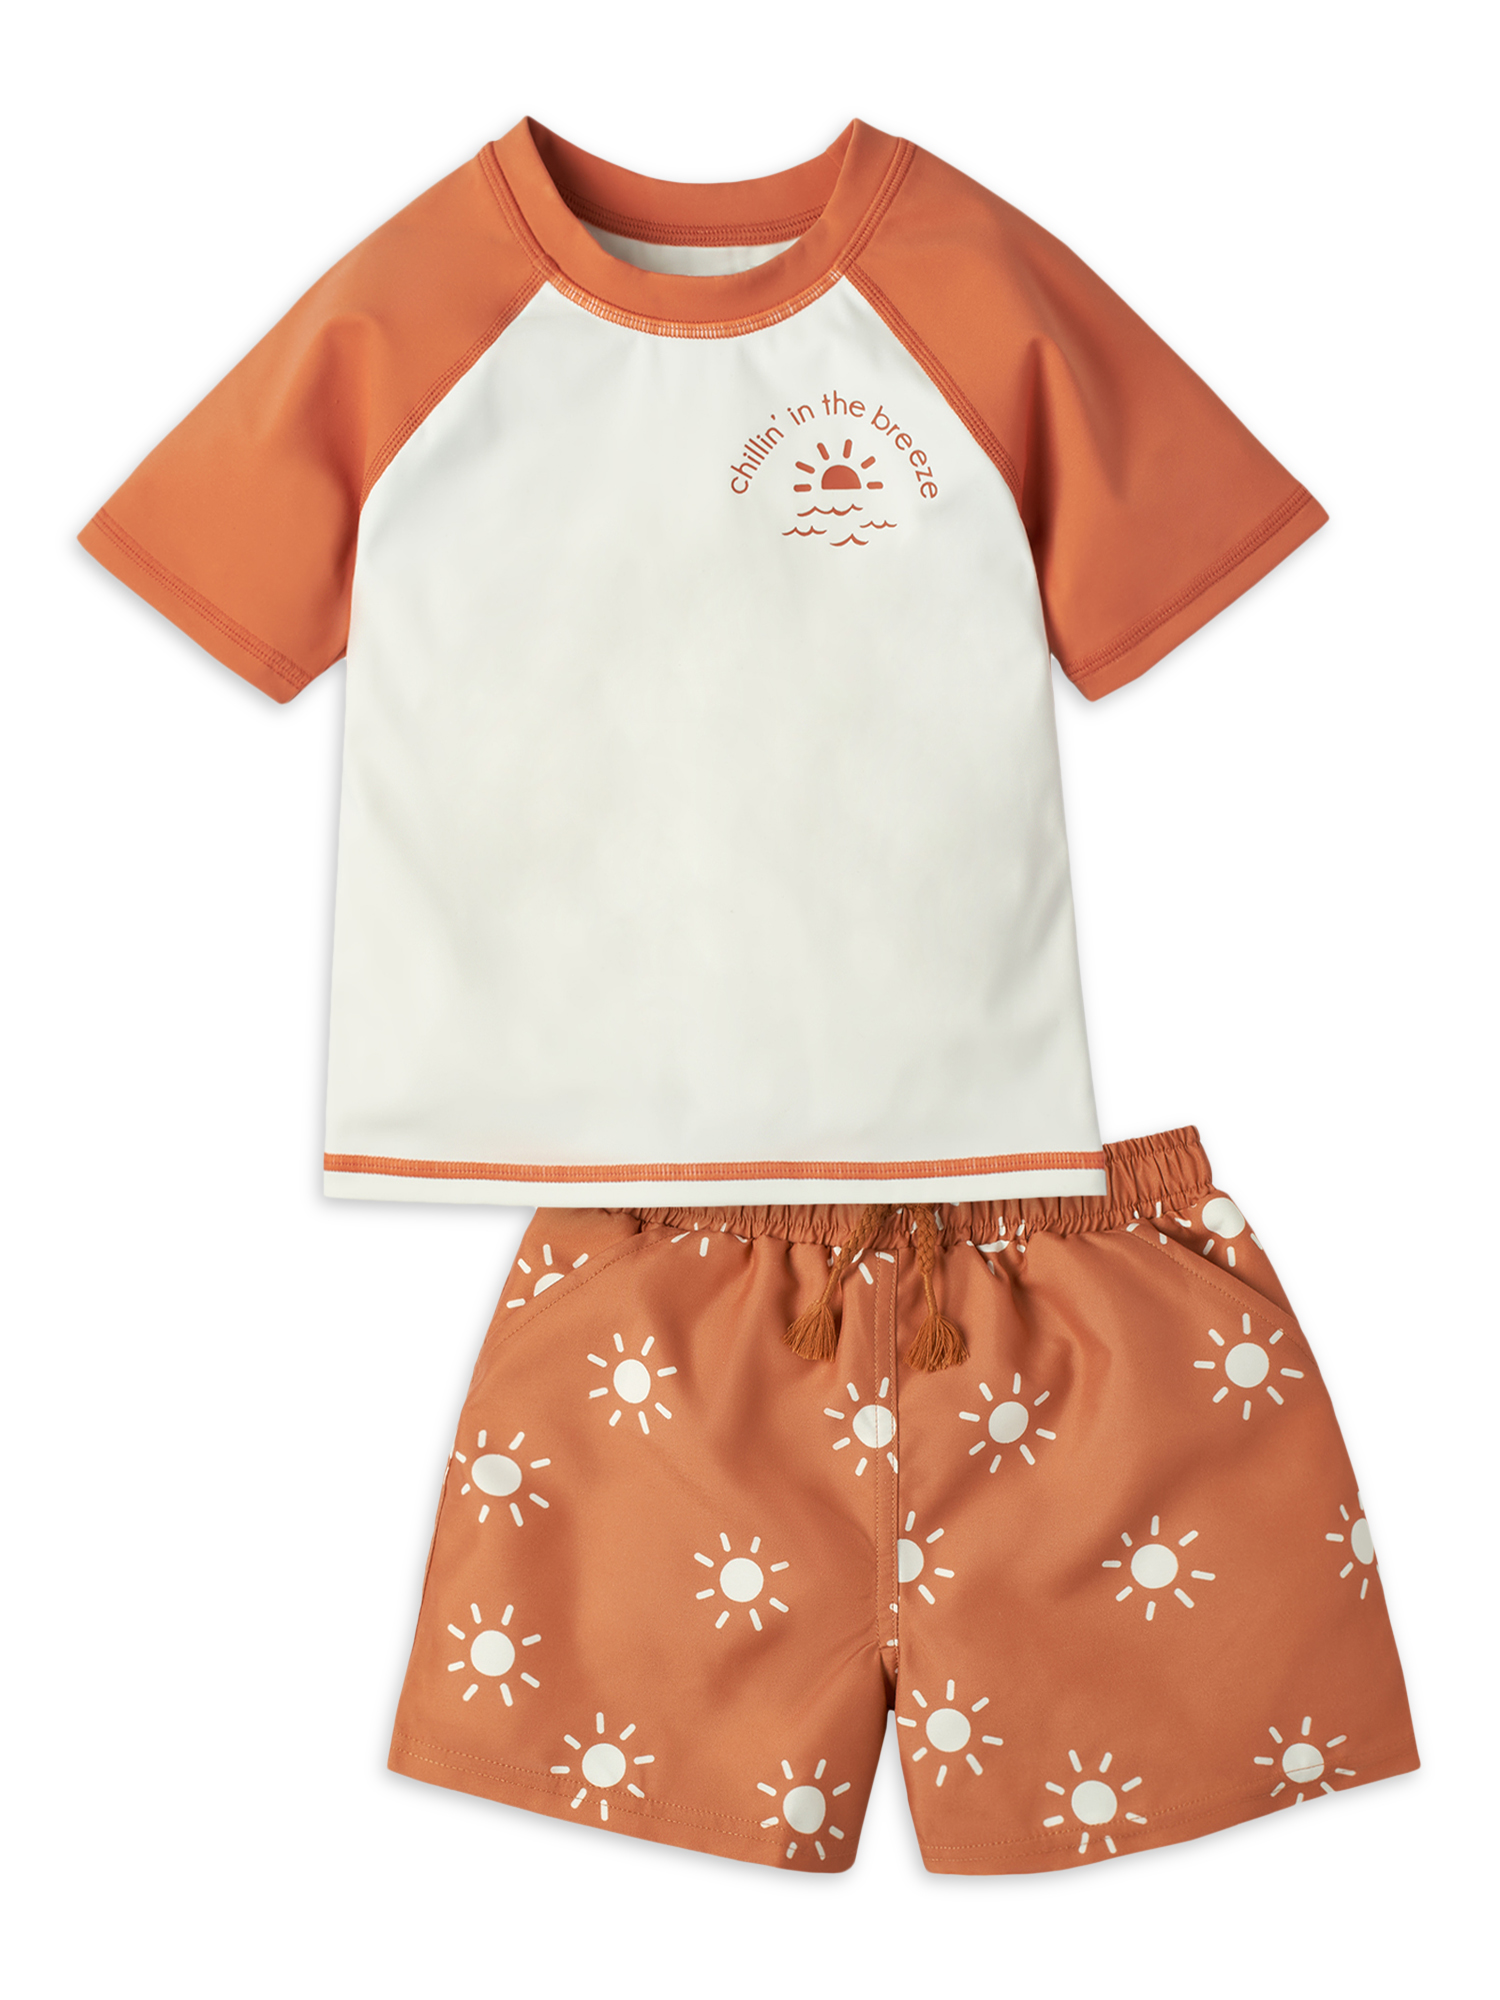 Modern Moments By Gerber Baby and Toddler Boy Rashguard and Swim Trunks Set, 12M-5T - image 3 of 12